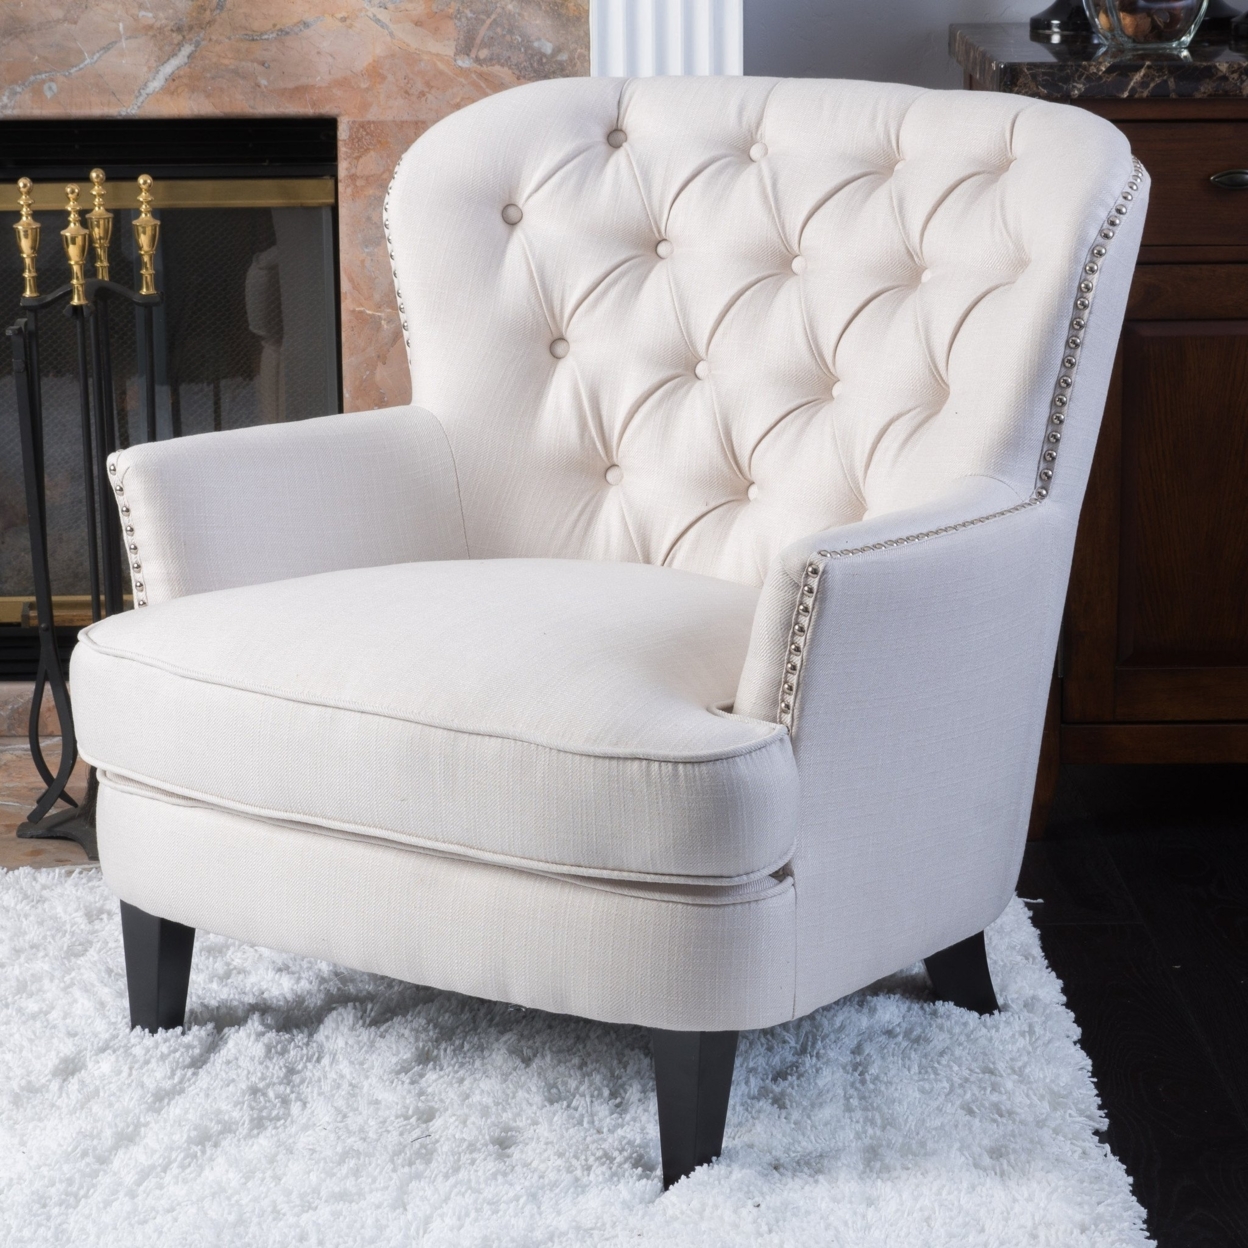 Laxford Upholstered Club Chair - Ivory, Fabric